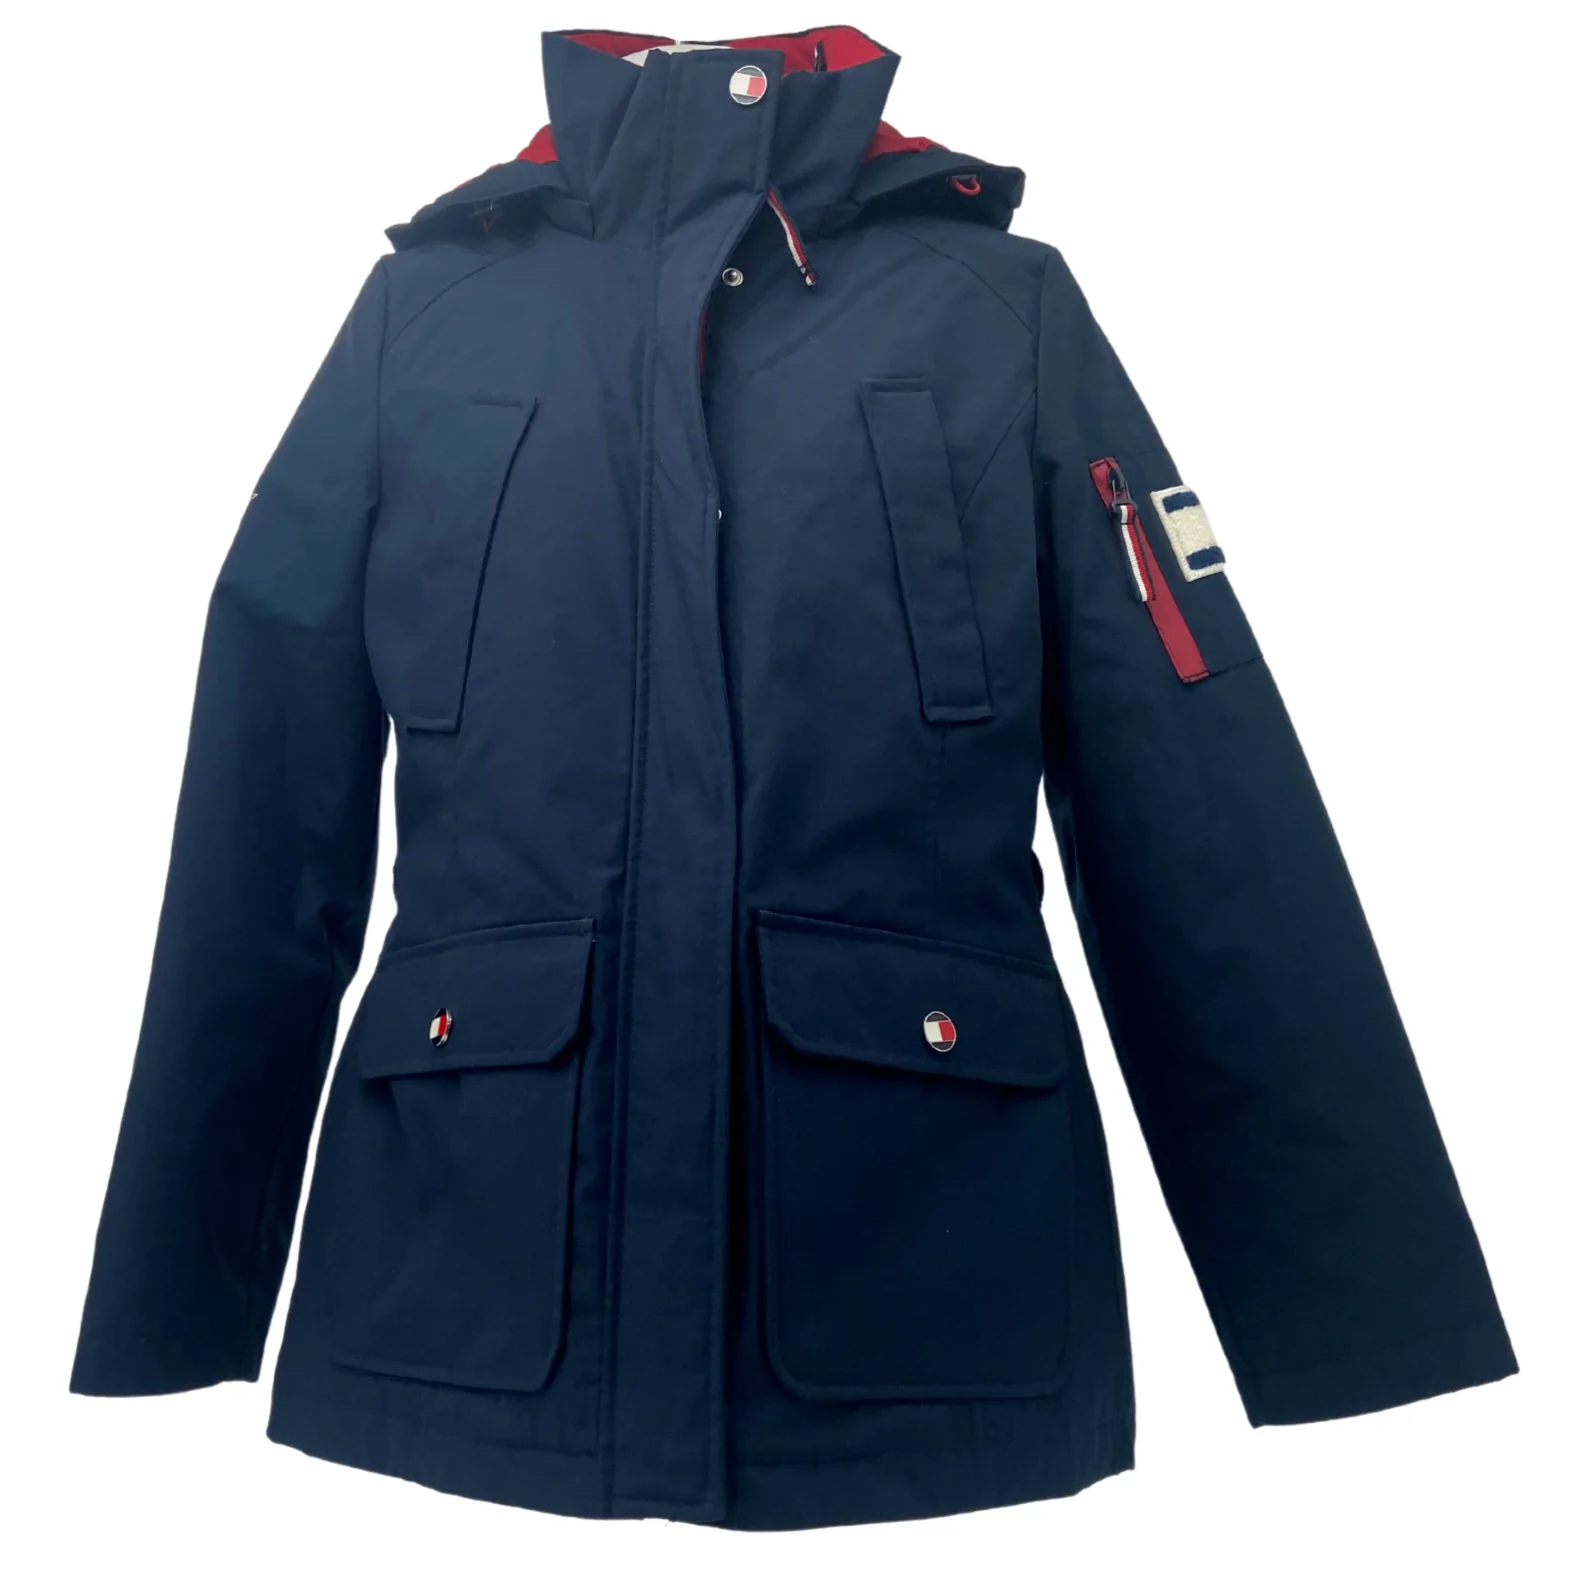 Tommy Hilfiger Women's 3 in 1 Winter Jacket / Various Sizes